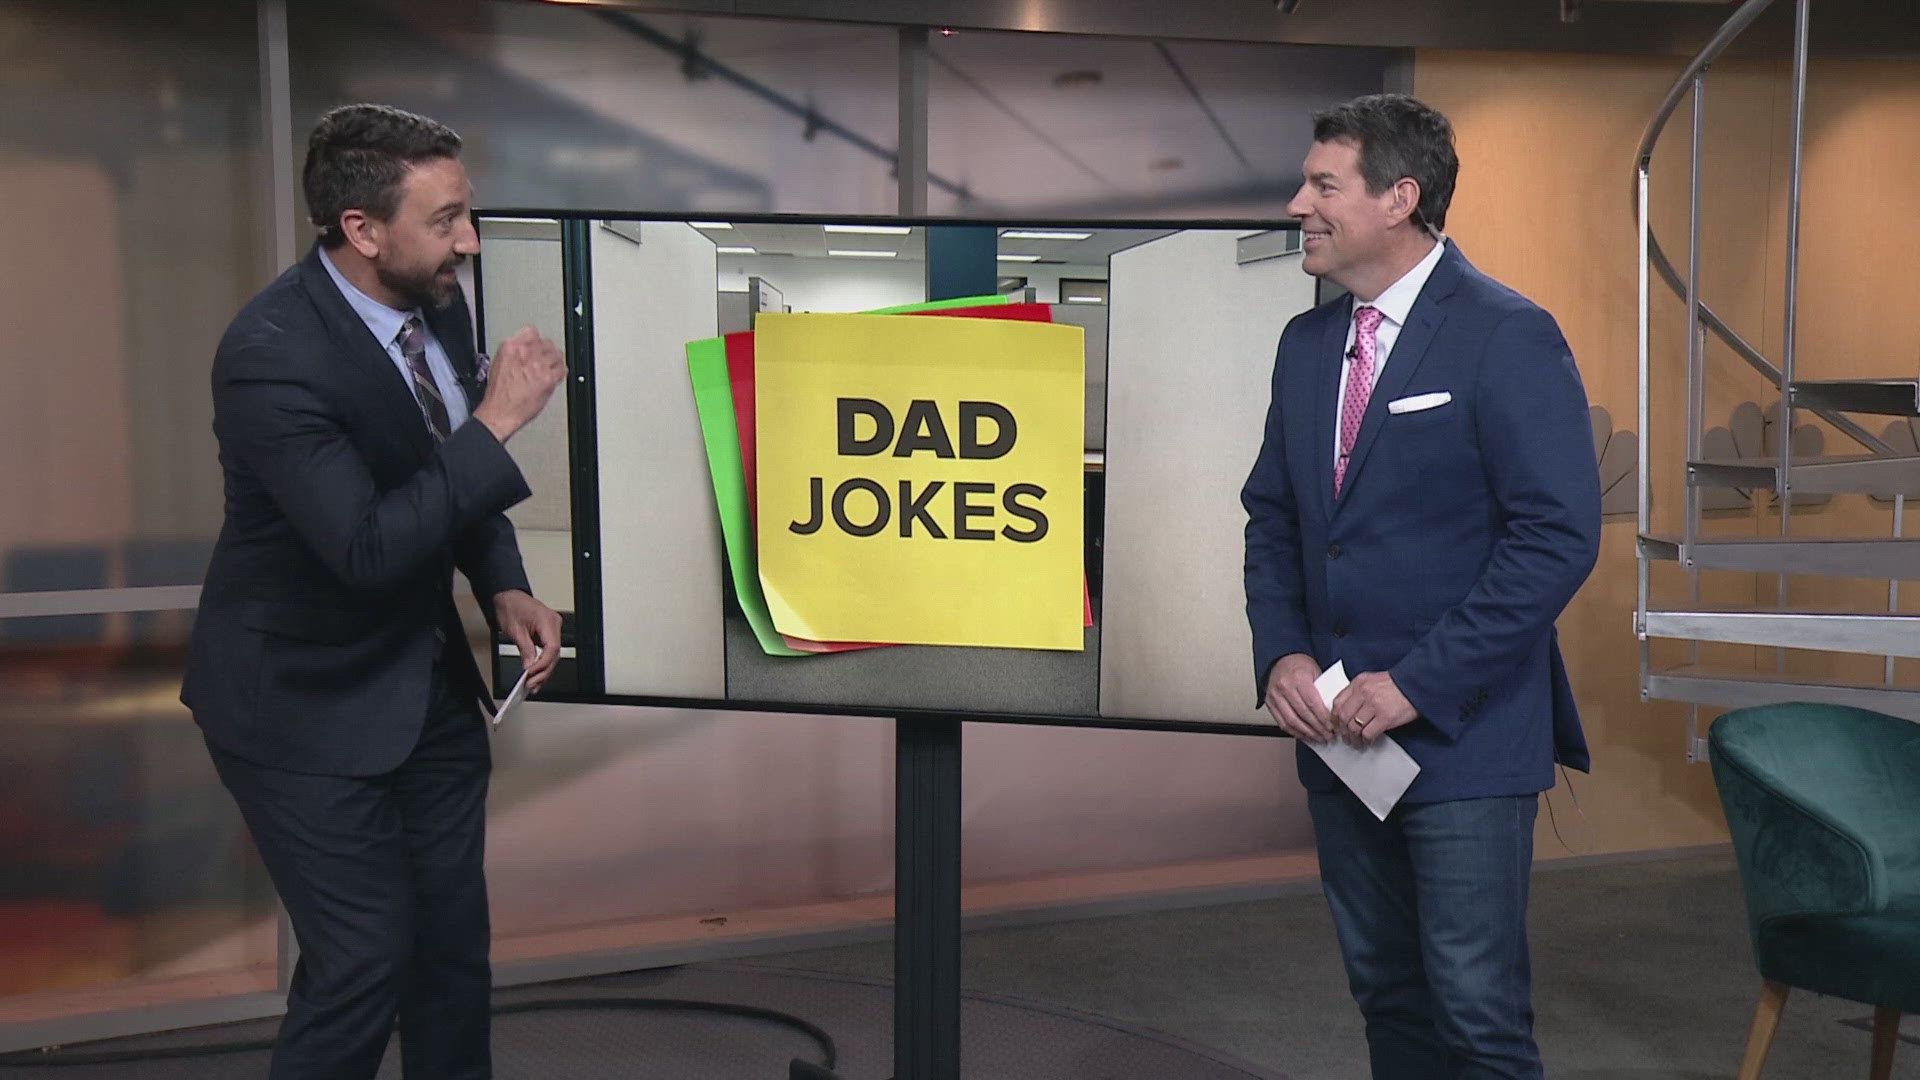 Get ready for another round of morning giggles as Matt Wintz and Dave Chudowsky unleash more dad jokes on WKYC.